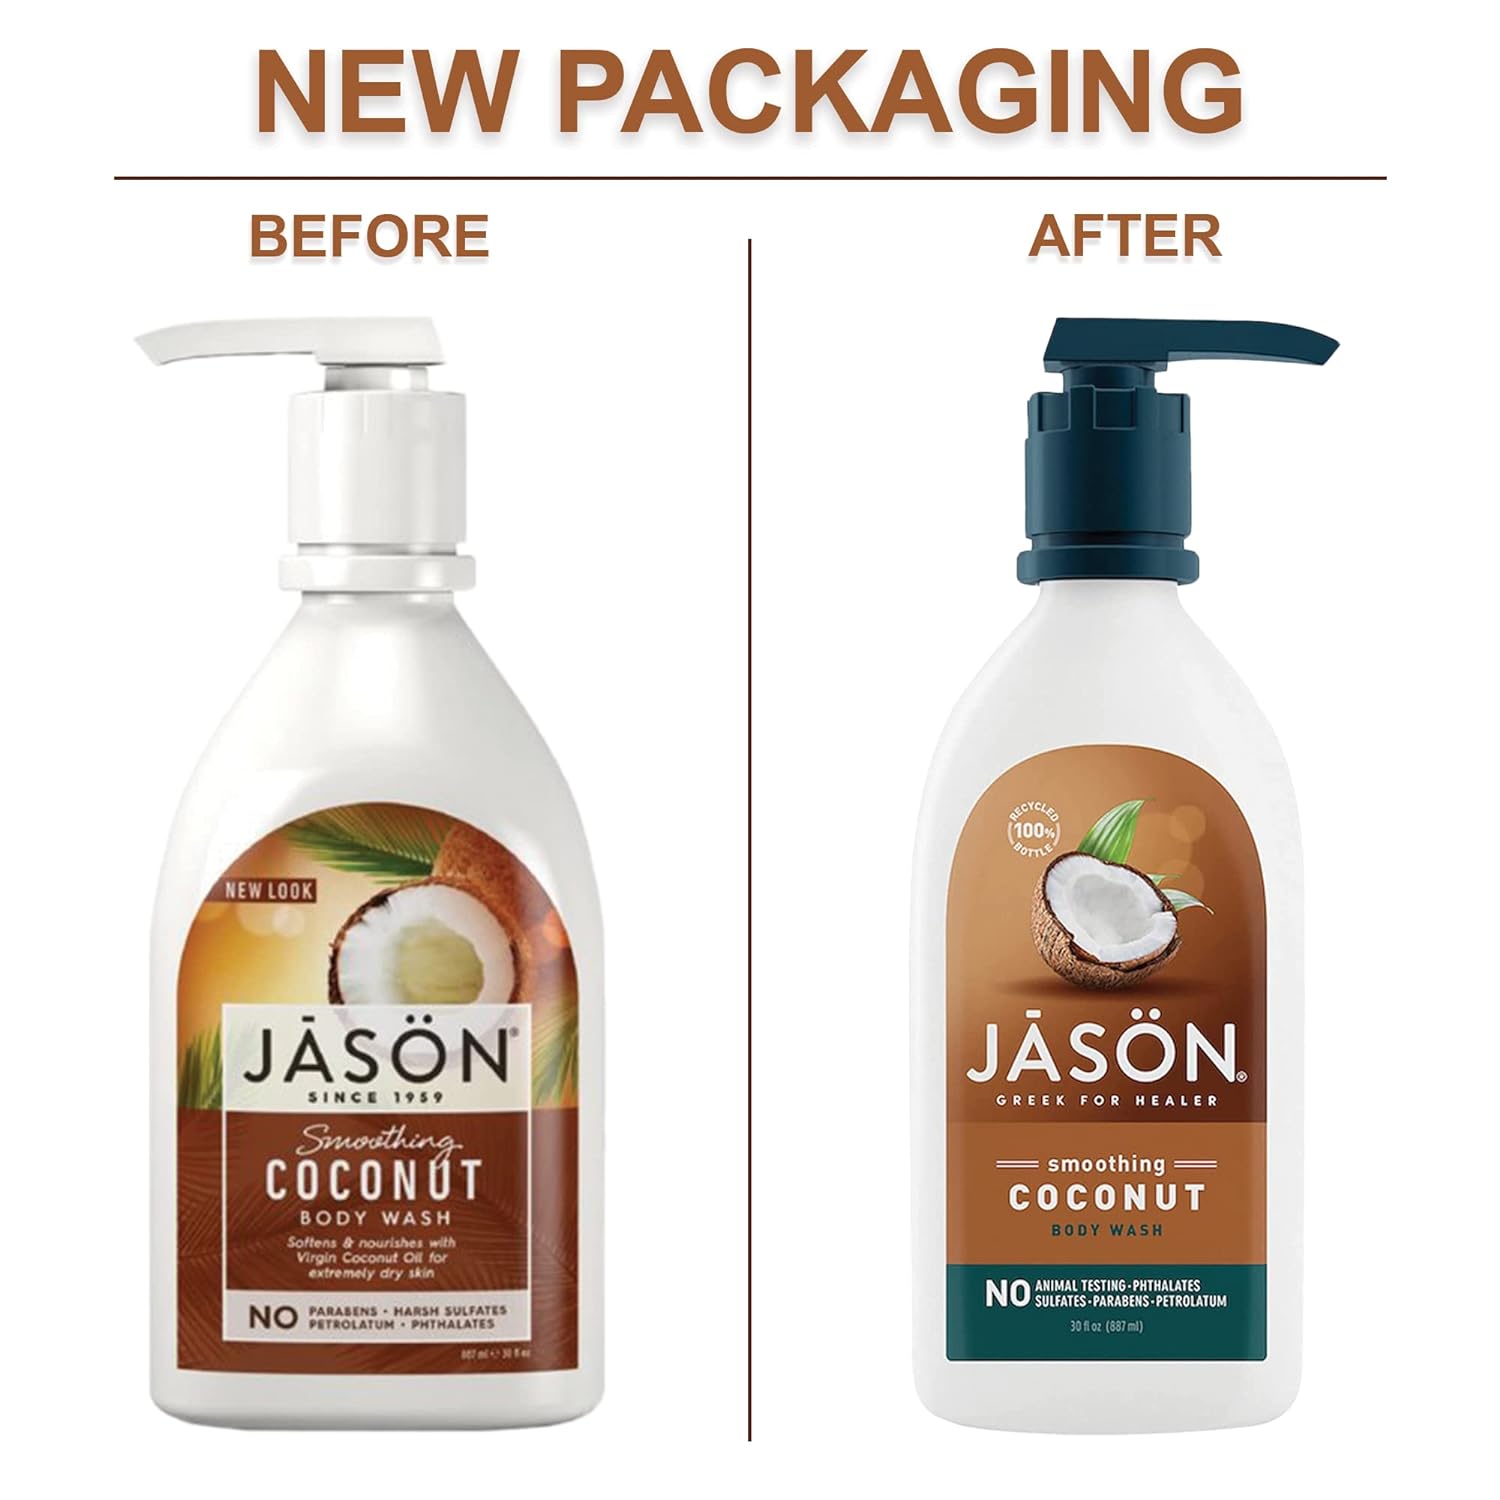 Jason Natural Body Wash & Shower Gel, Smoothing Coconut, 30 Oz : Beauty & Personal Care